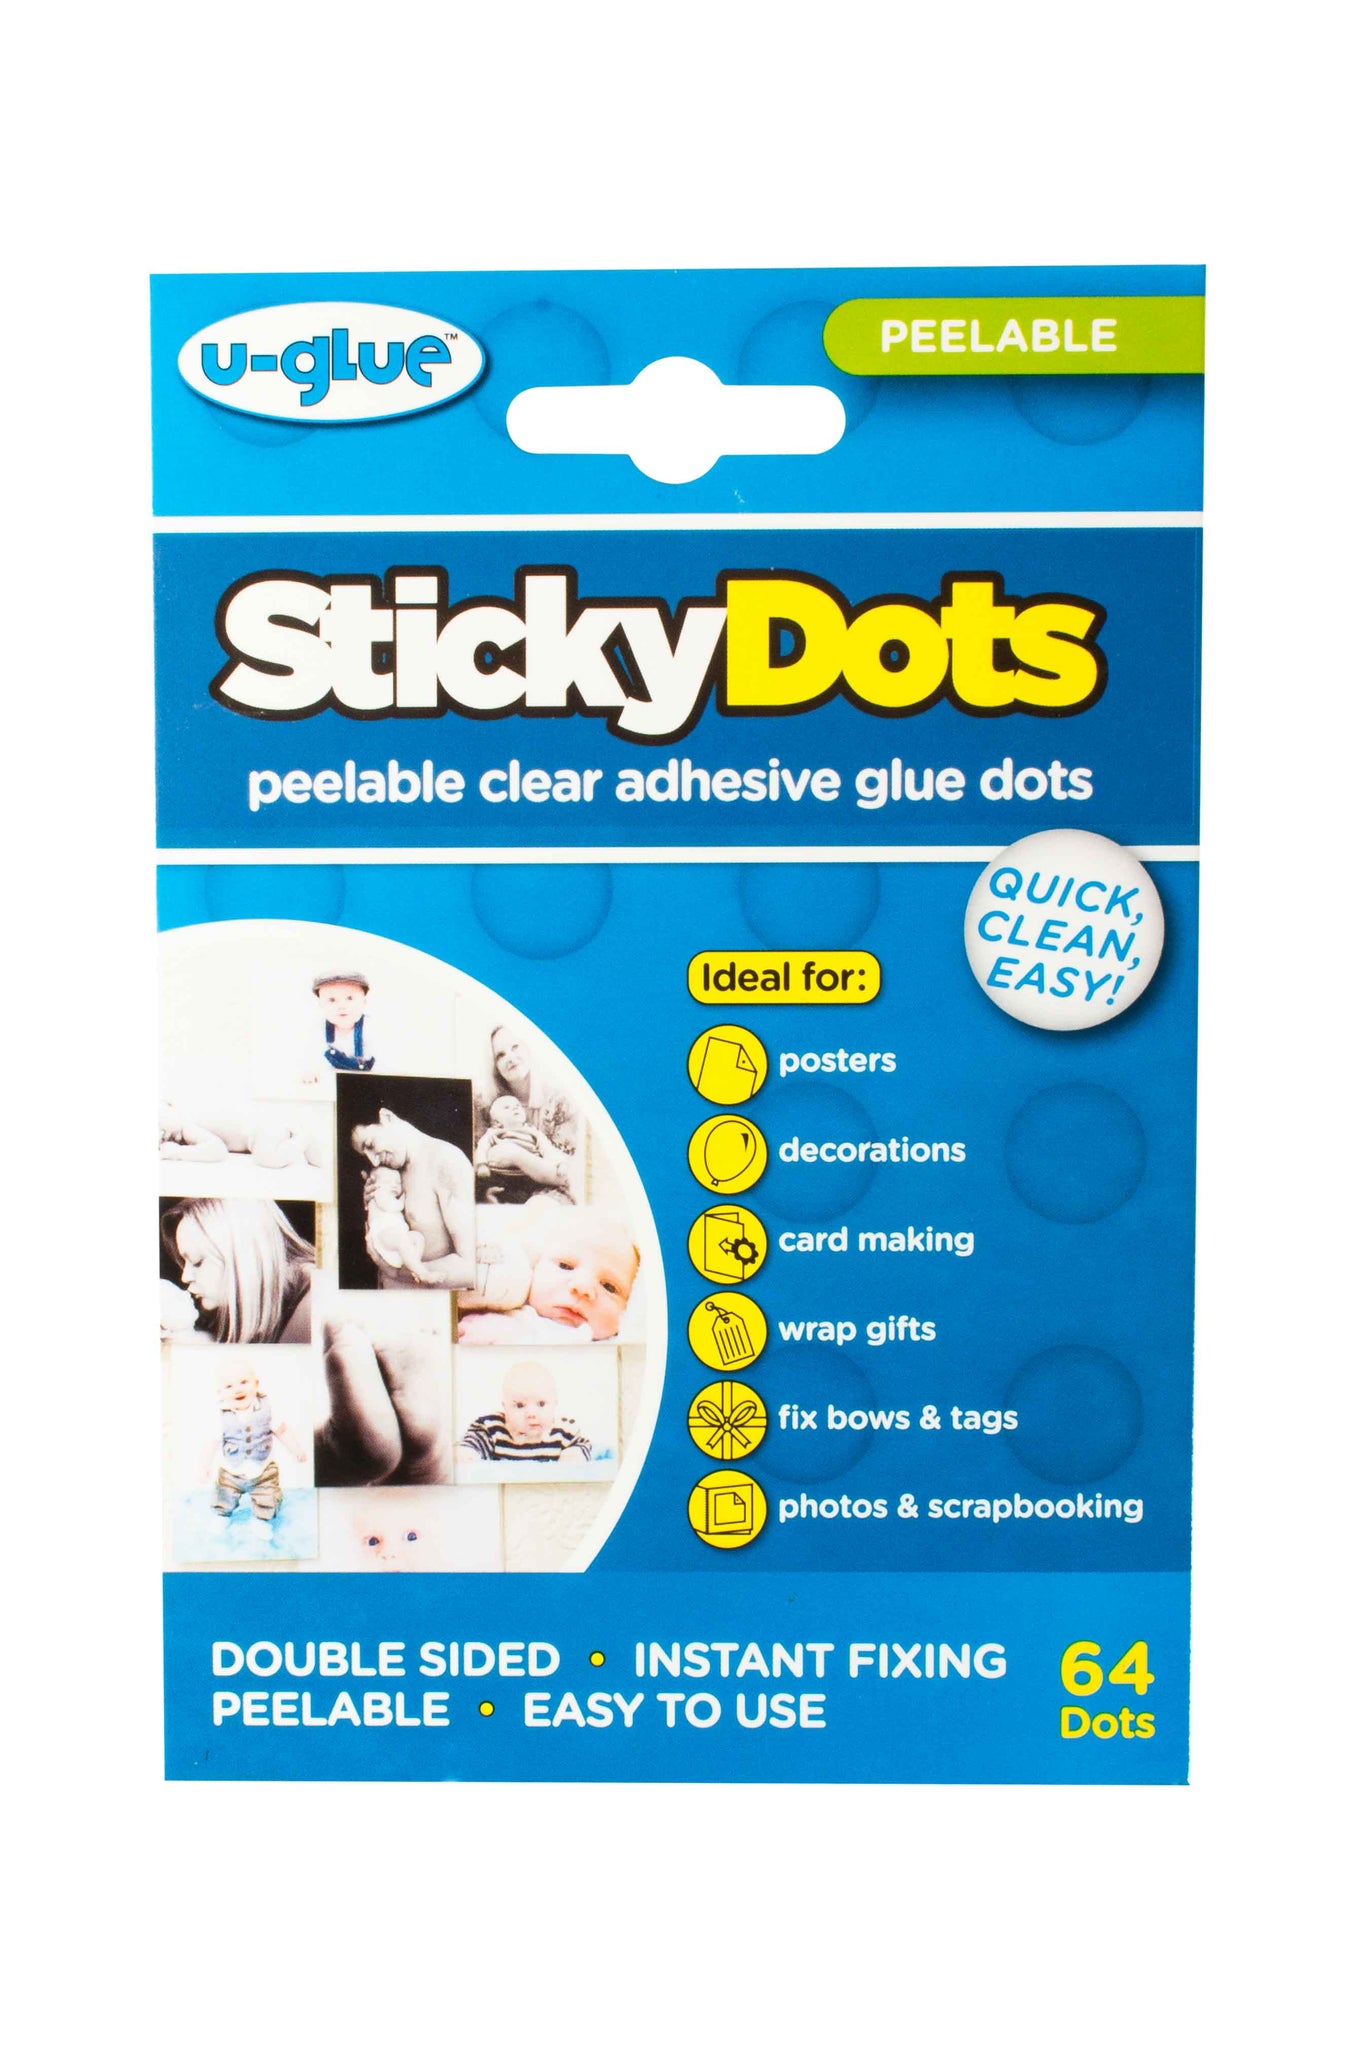 Glue Dots Double-Sided Adhesive Permanent All Purpose Dots 1/2